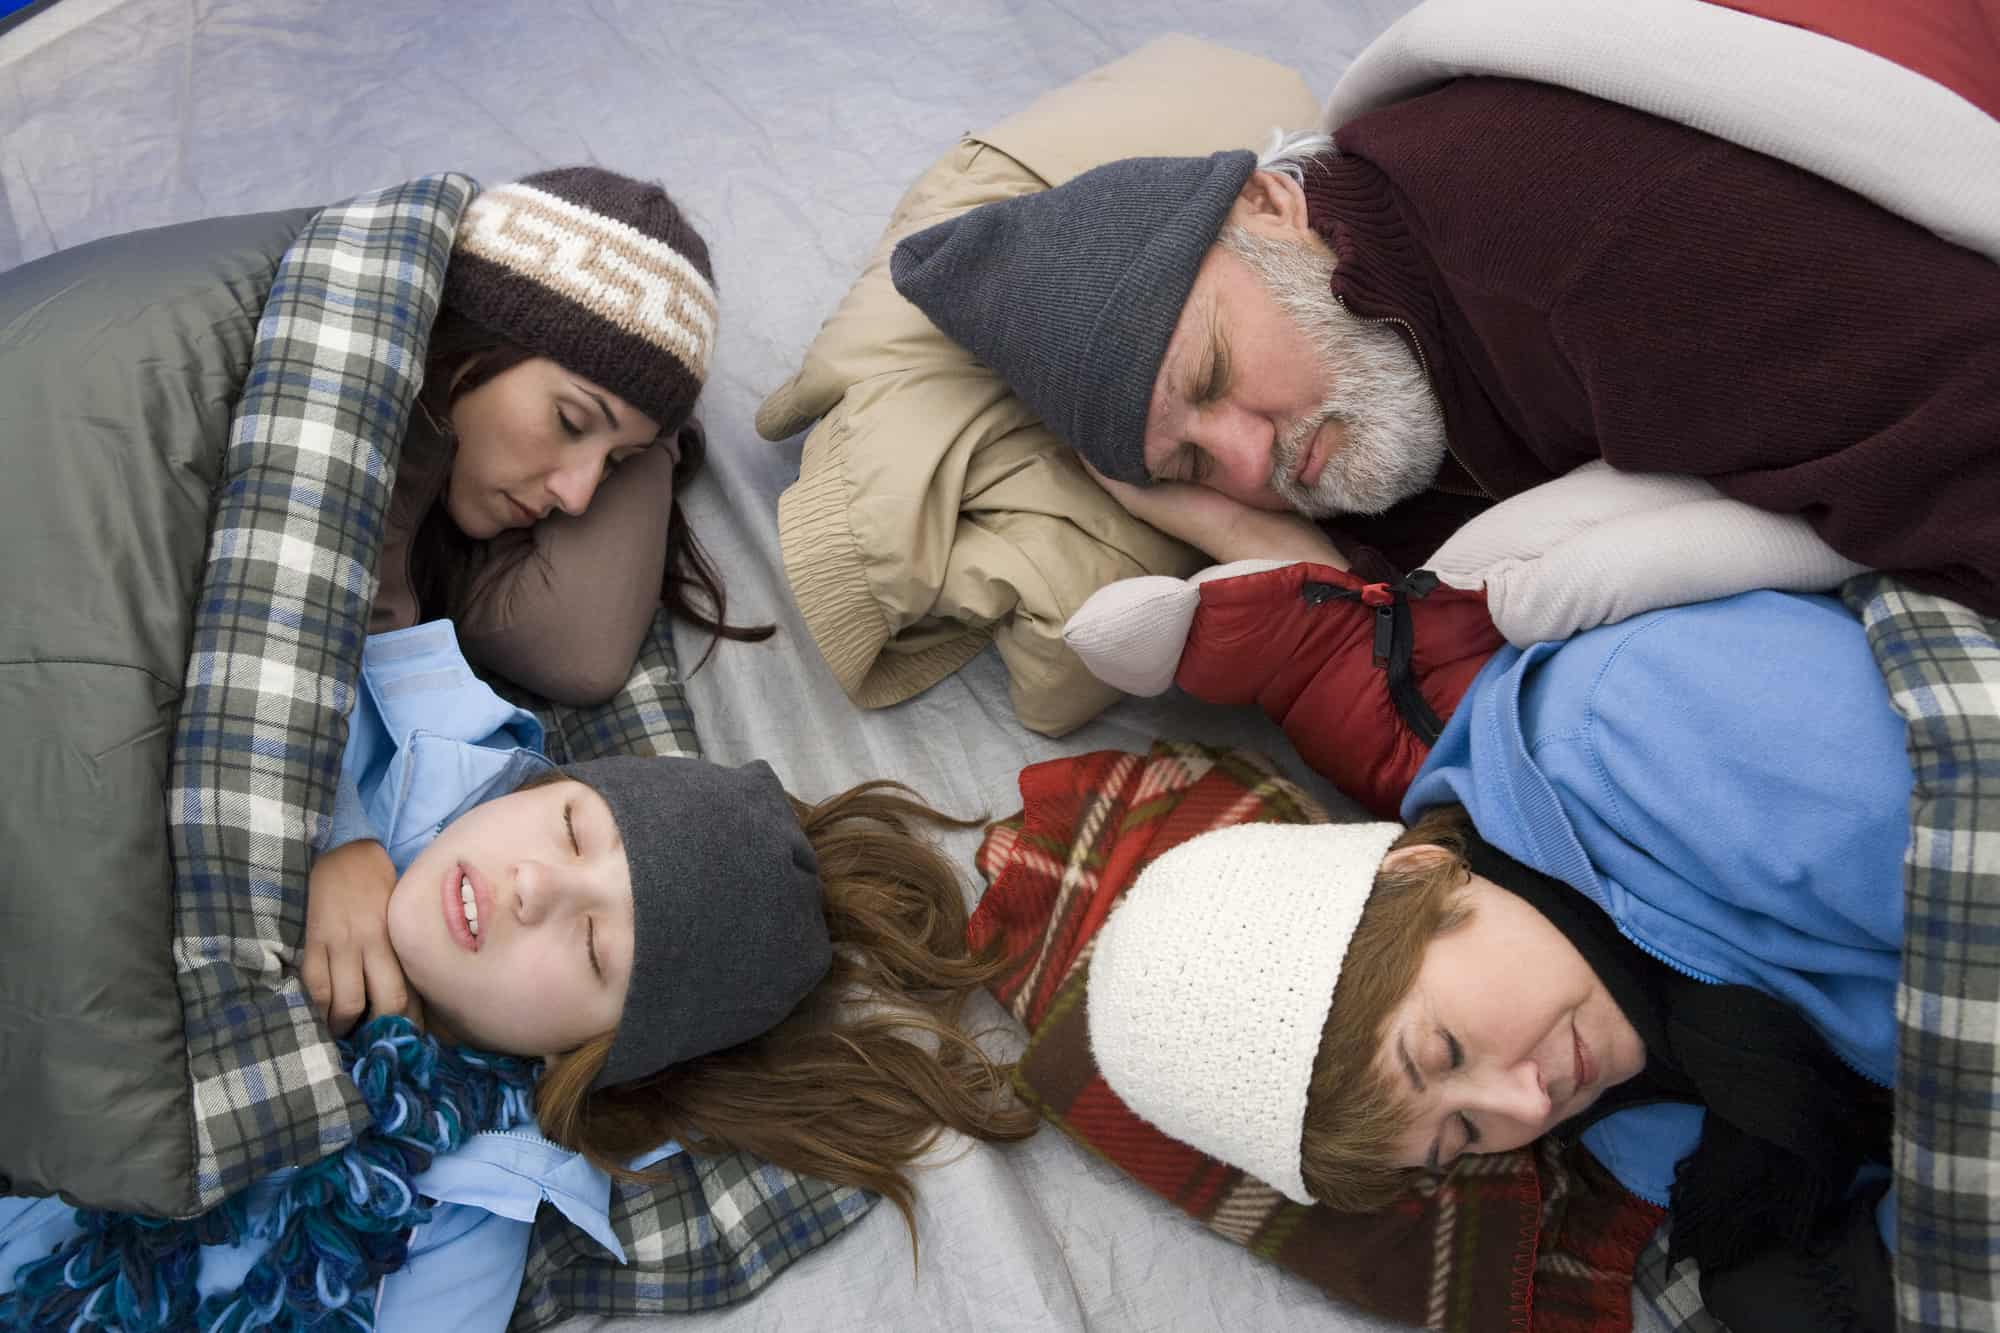 Family winter camping, all snuggled close together in tent